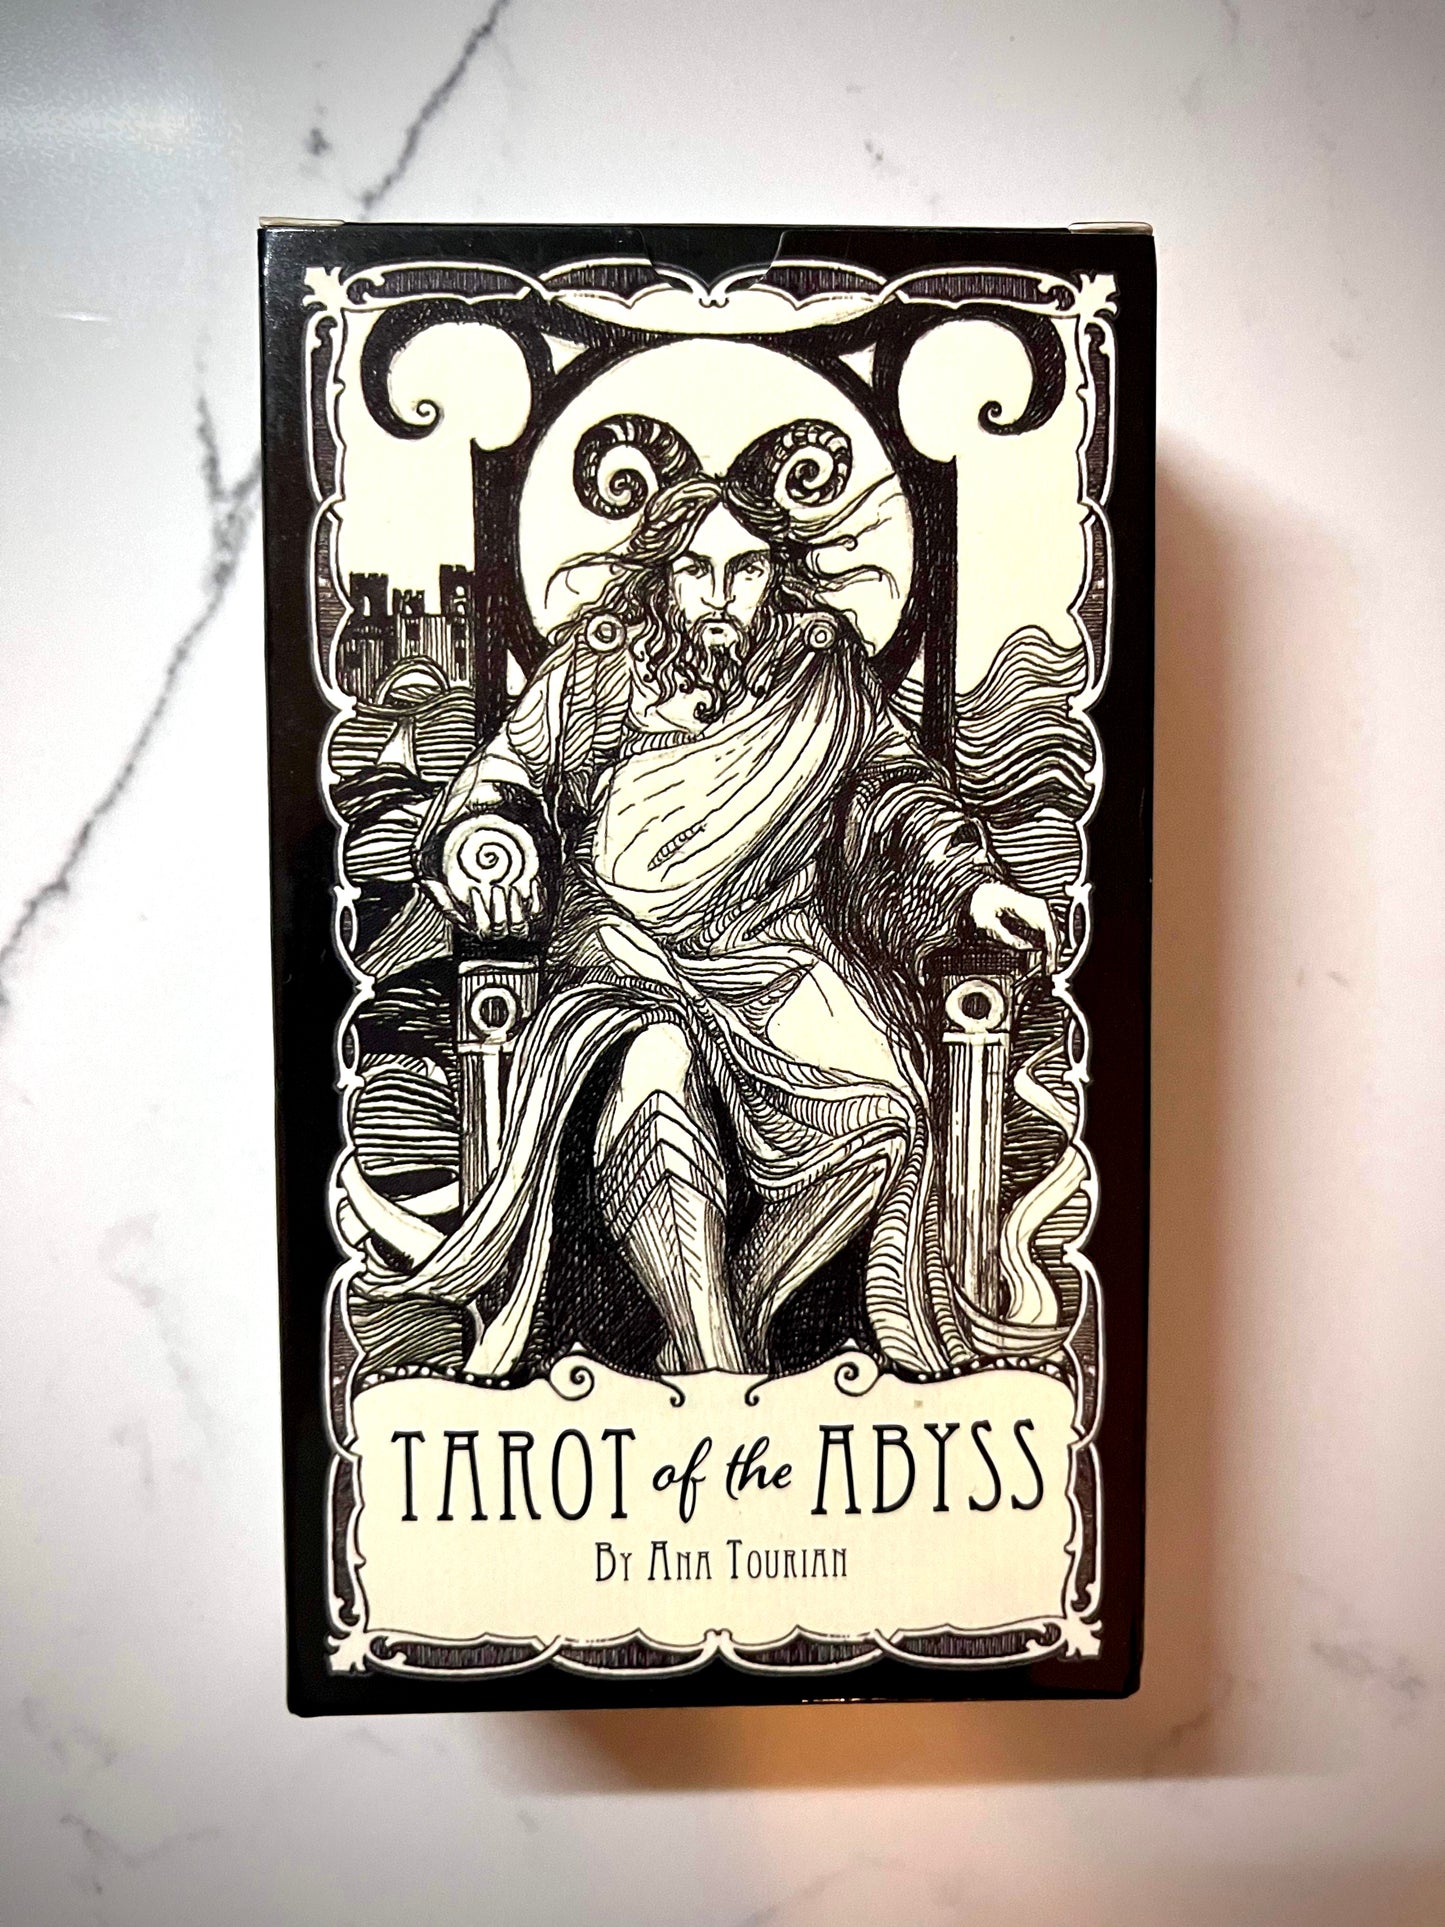 Tarot of the abyss